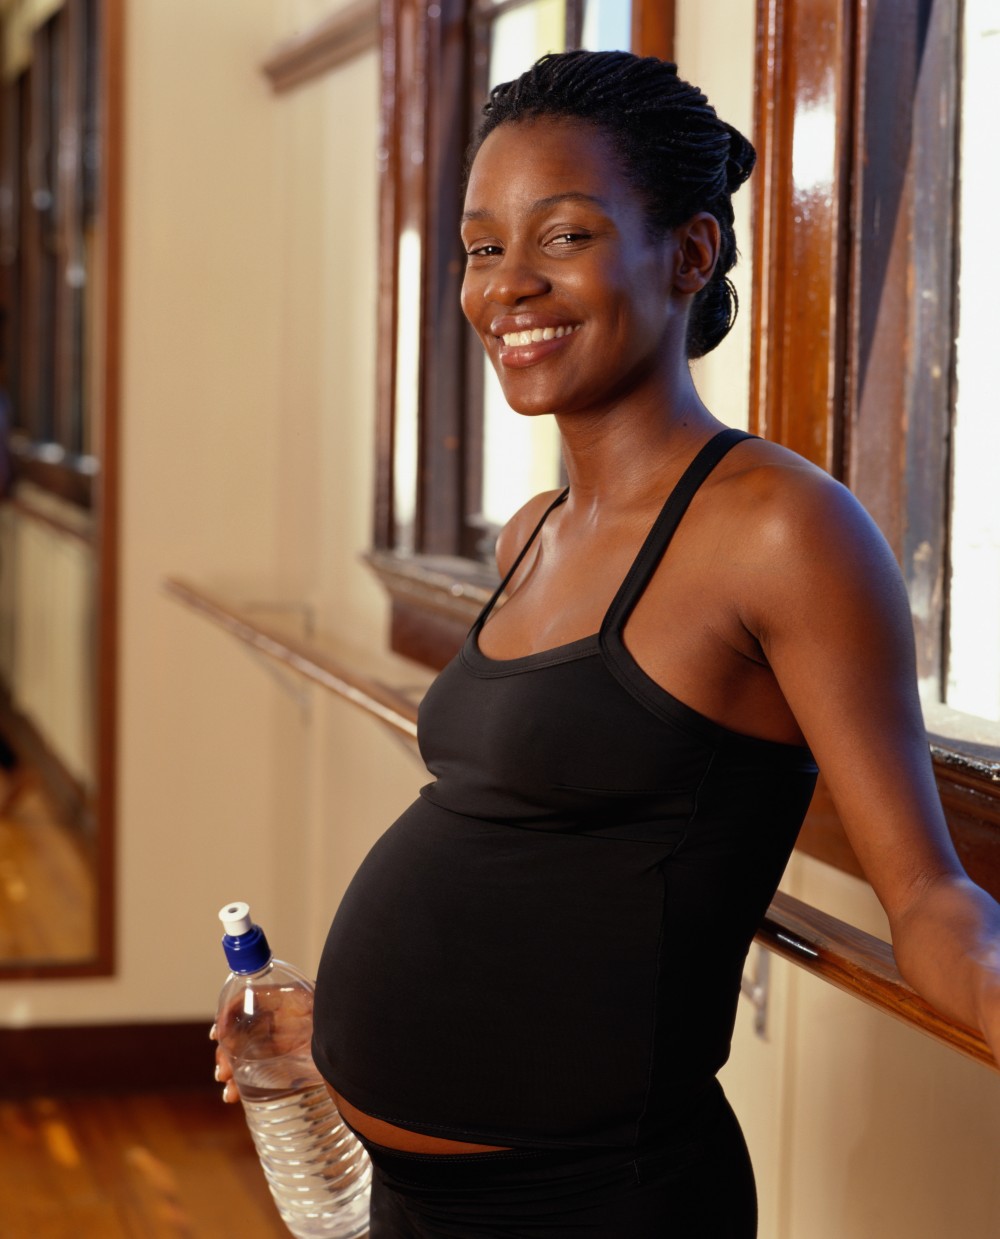 Is it safe to exercise while pregnant?